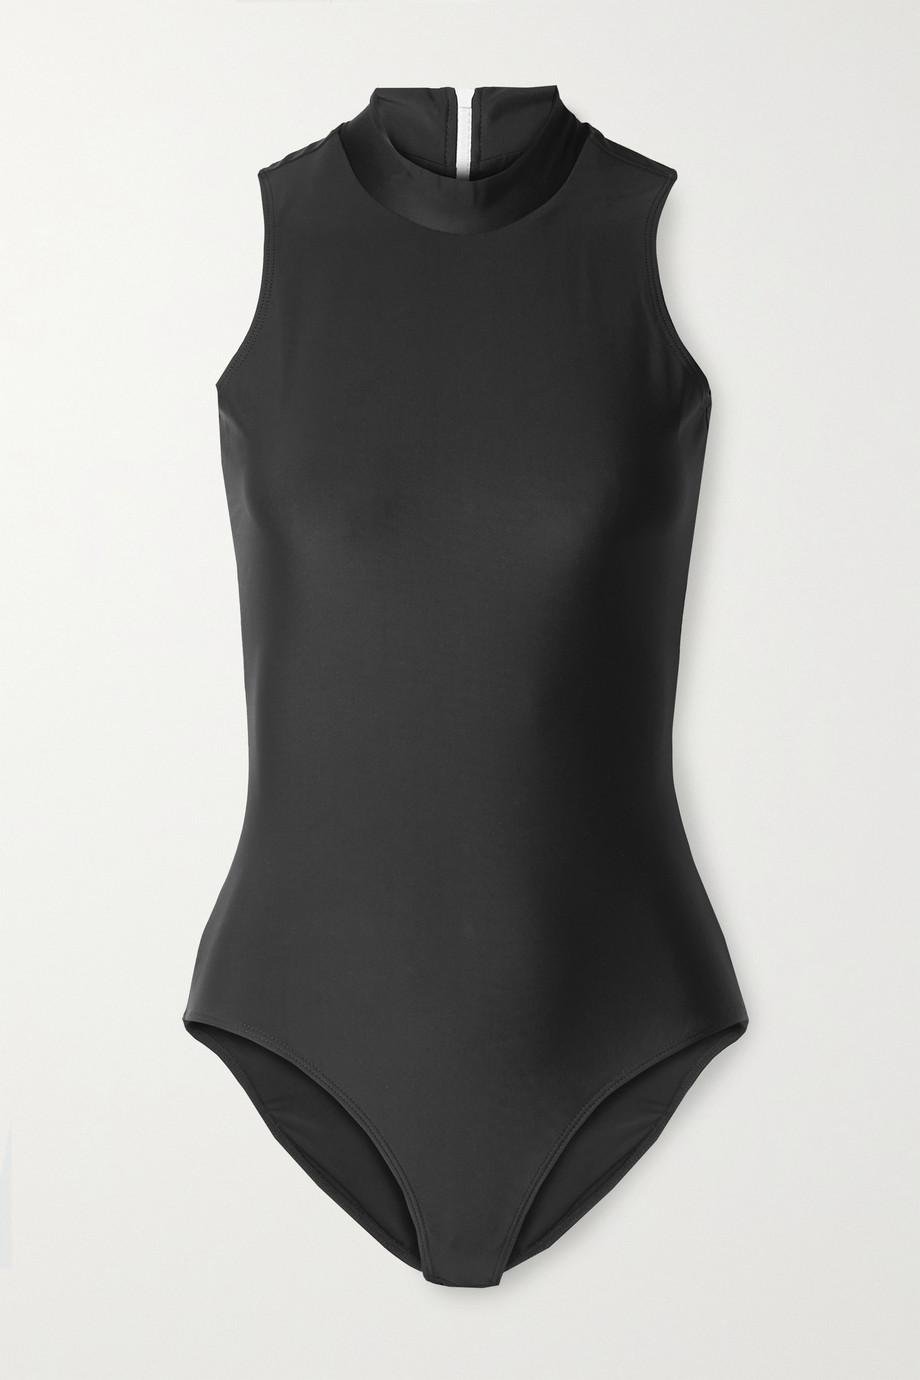 + NET SUSTAIN recycled swimsuit by COVER SWIM